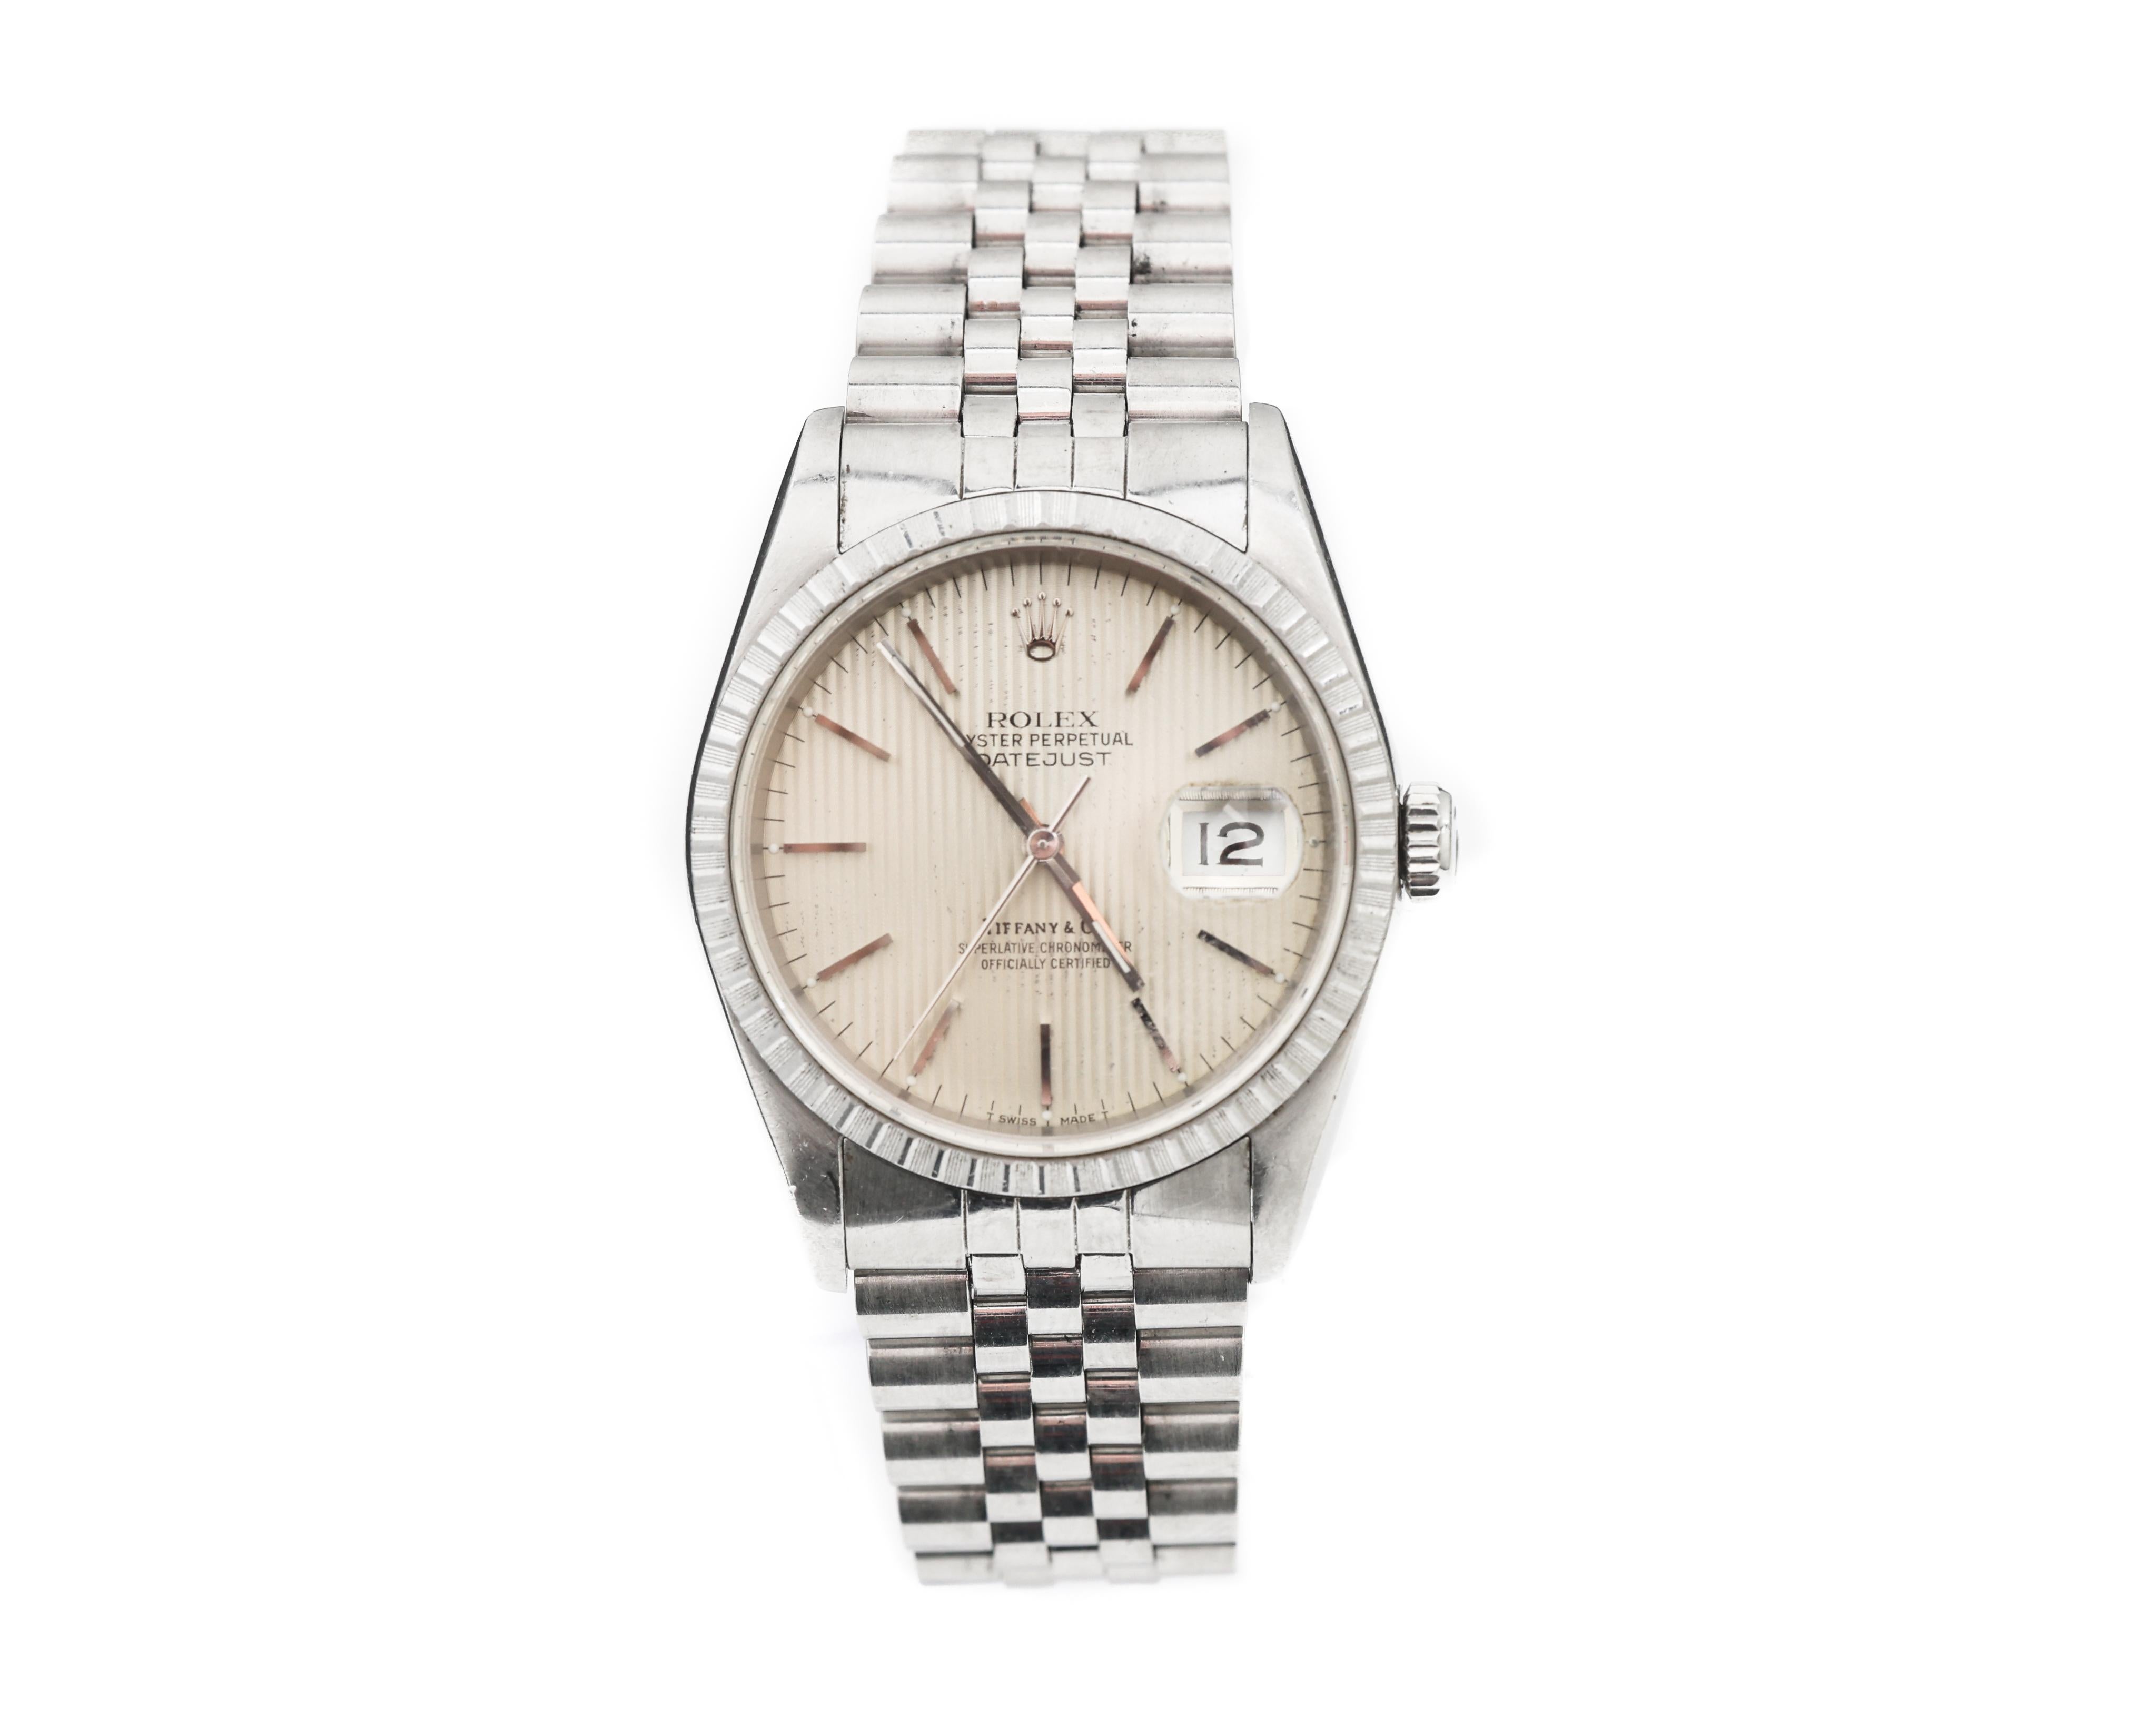 Era	        Modern
Brand	Rolex
Style	Datejust
Model	16220
Serial	EXXX,XXX
Material	Stainless Steel
Dial	Tapestry
Millimeters	36
Bracelet	Jubilee
Excellent silver Super Luminova dial with Tapestry pattern and matching hands